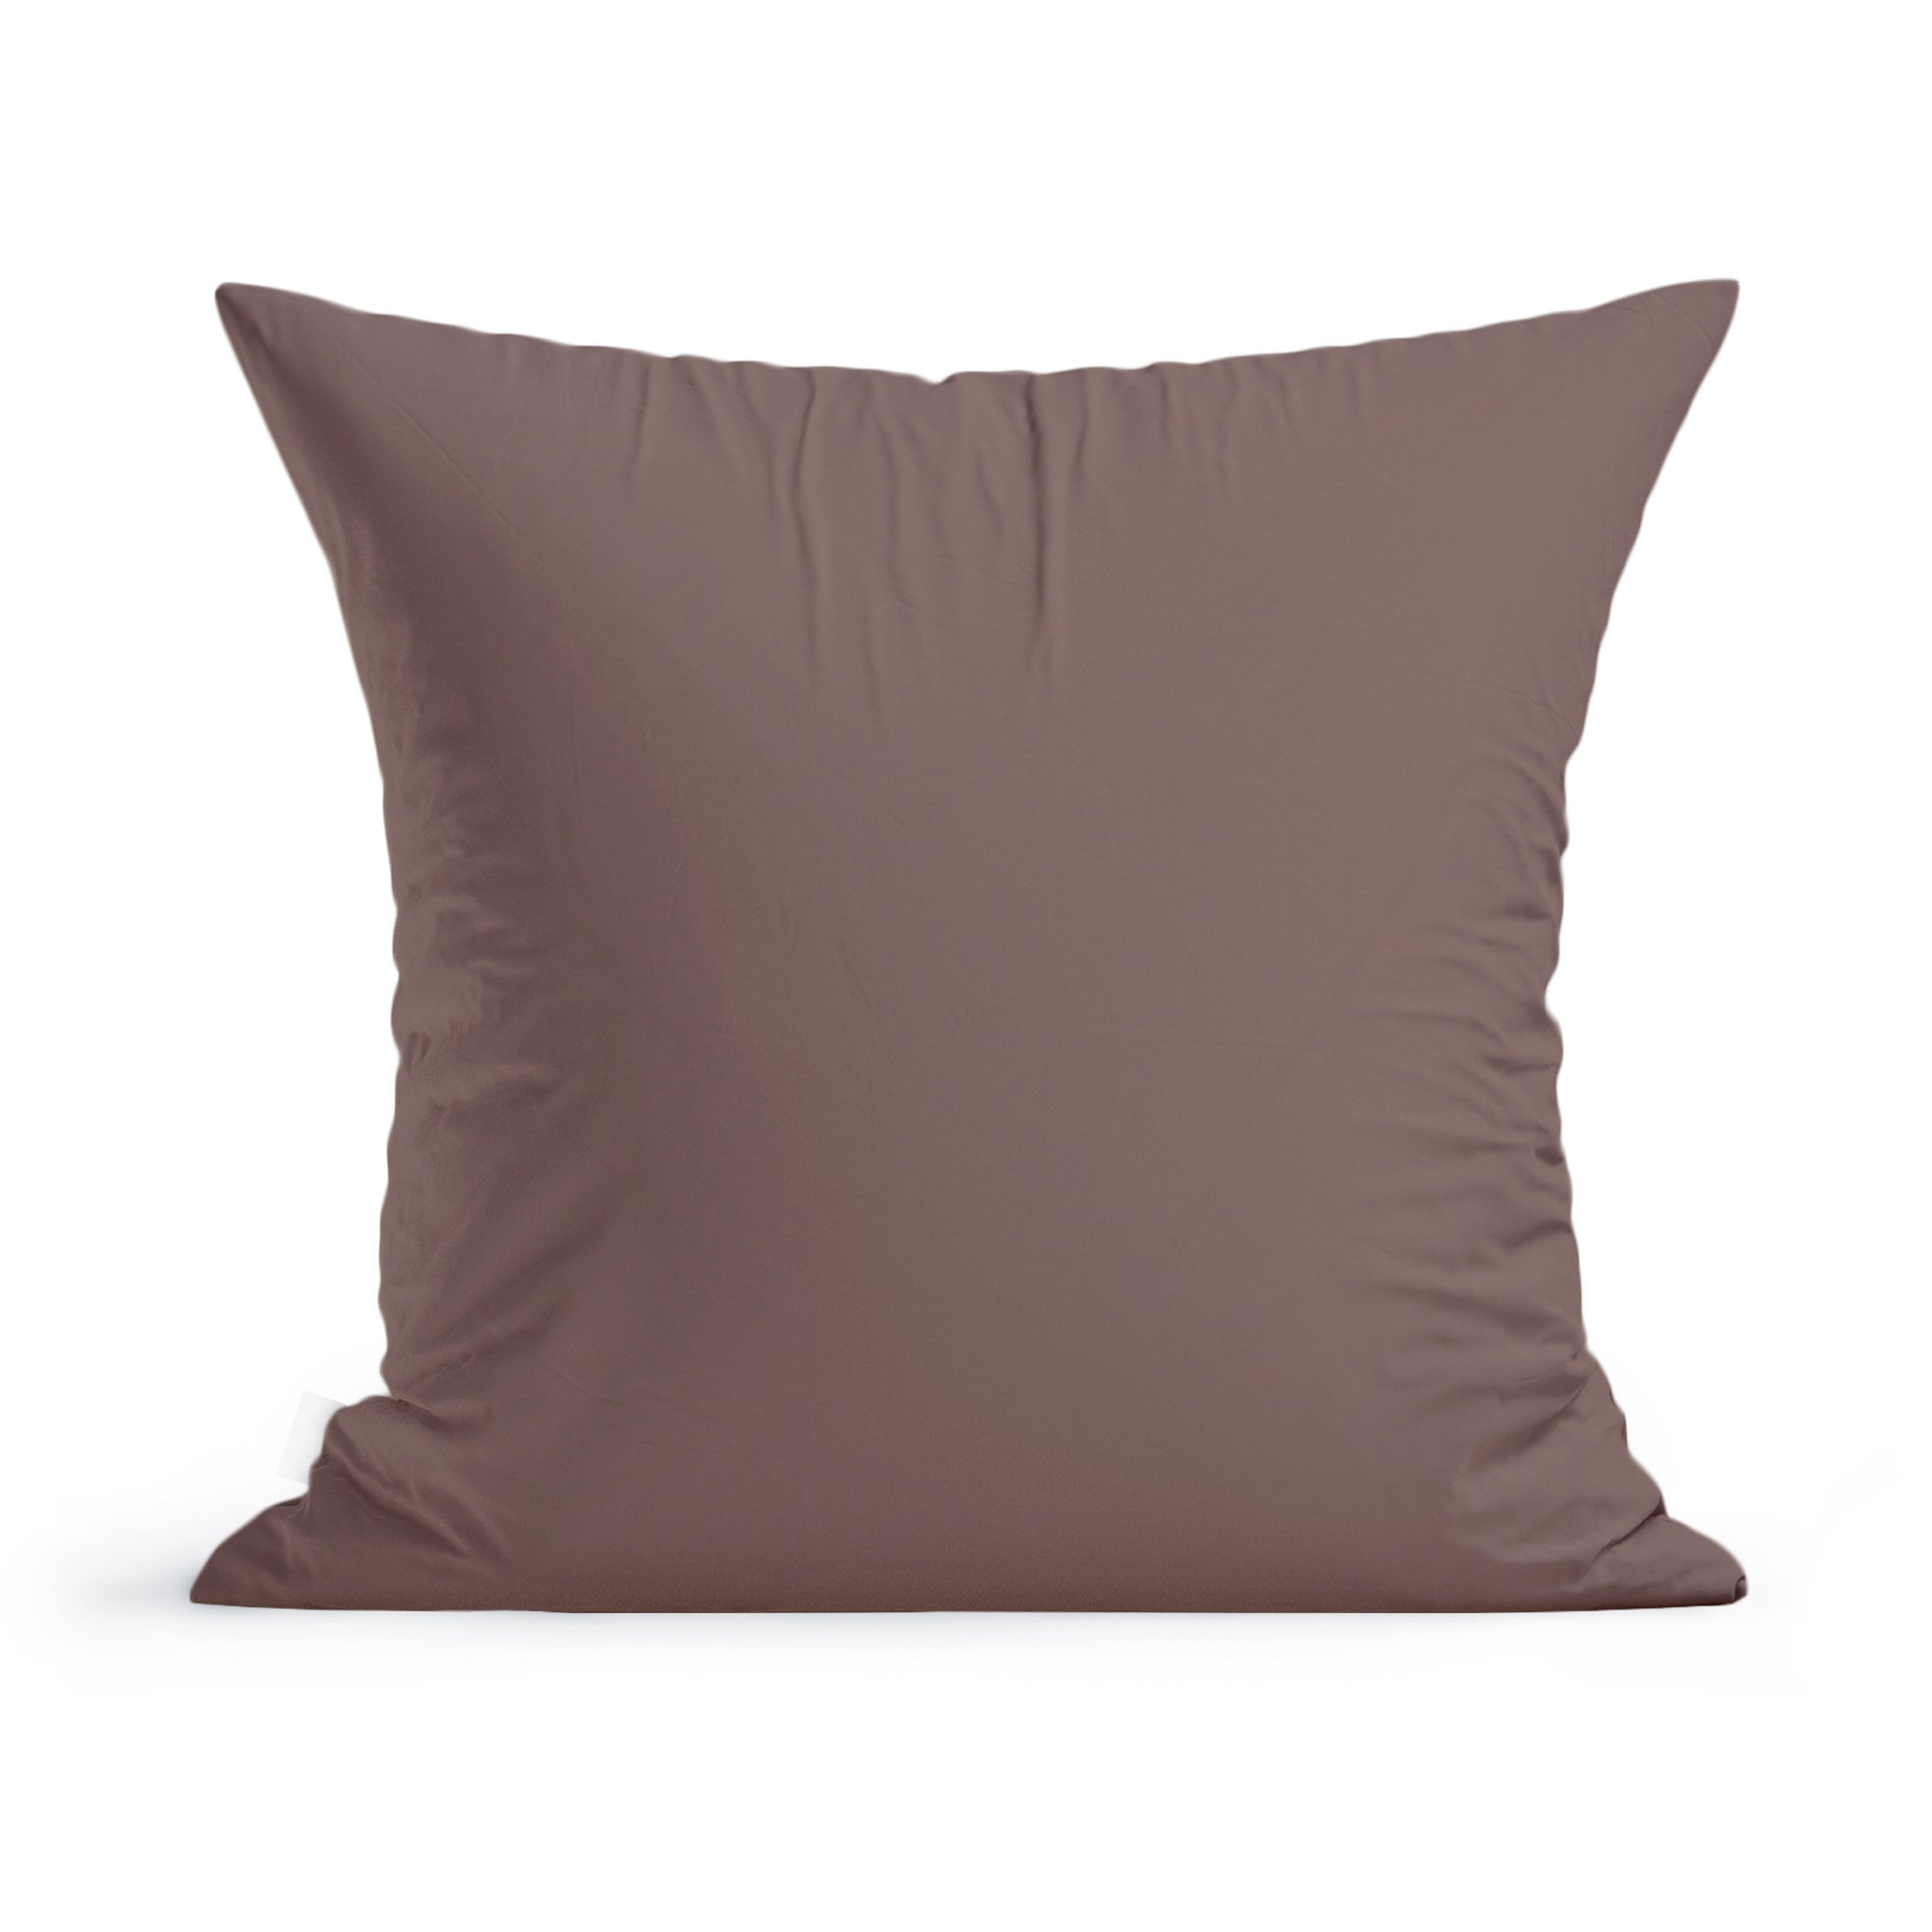 A square, fluffy pillow with a solid brown cover, reminiscent of the natural beauty found in Maine. The pillow appears smooth and slightly wrinkled, sitting upright against a white background, much like the Rustic County Maine Pinecones Pillow.